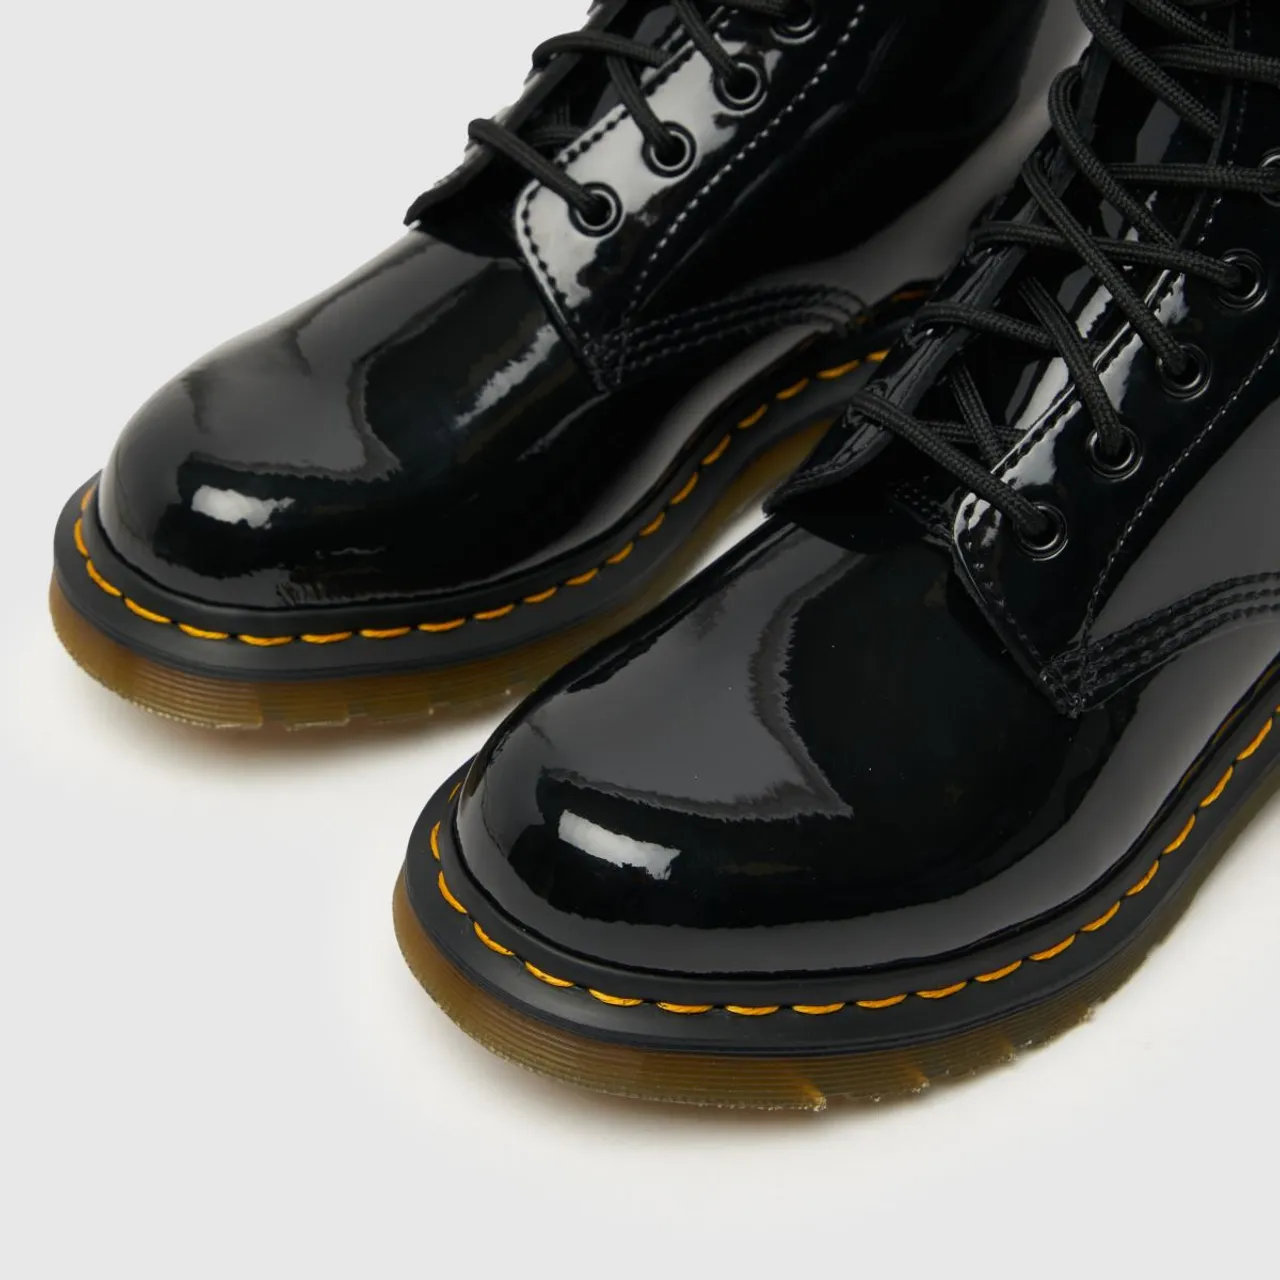 Dr Martens 1460 8 Eye Patent Boots In Black